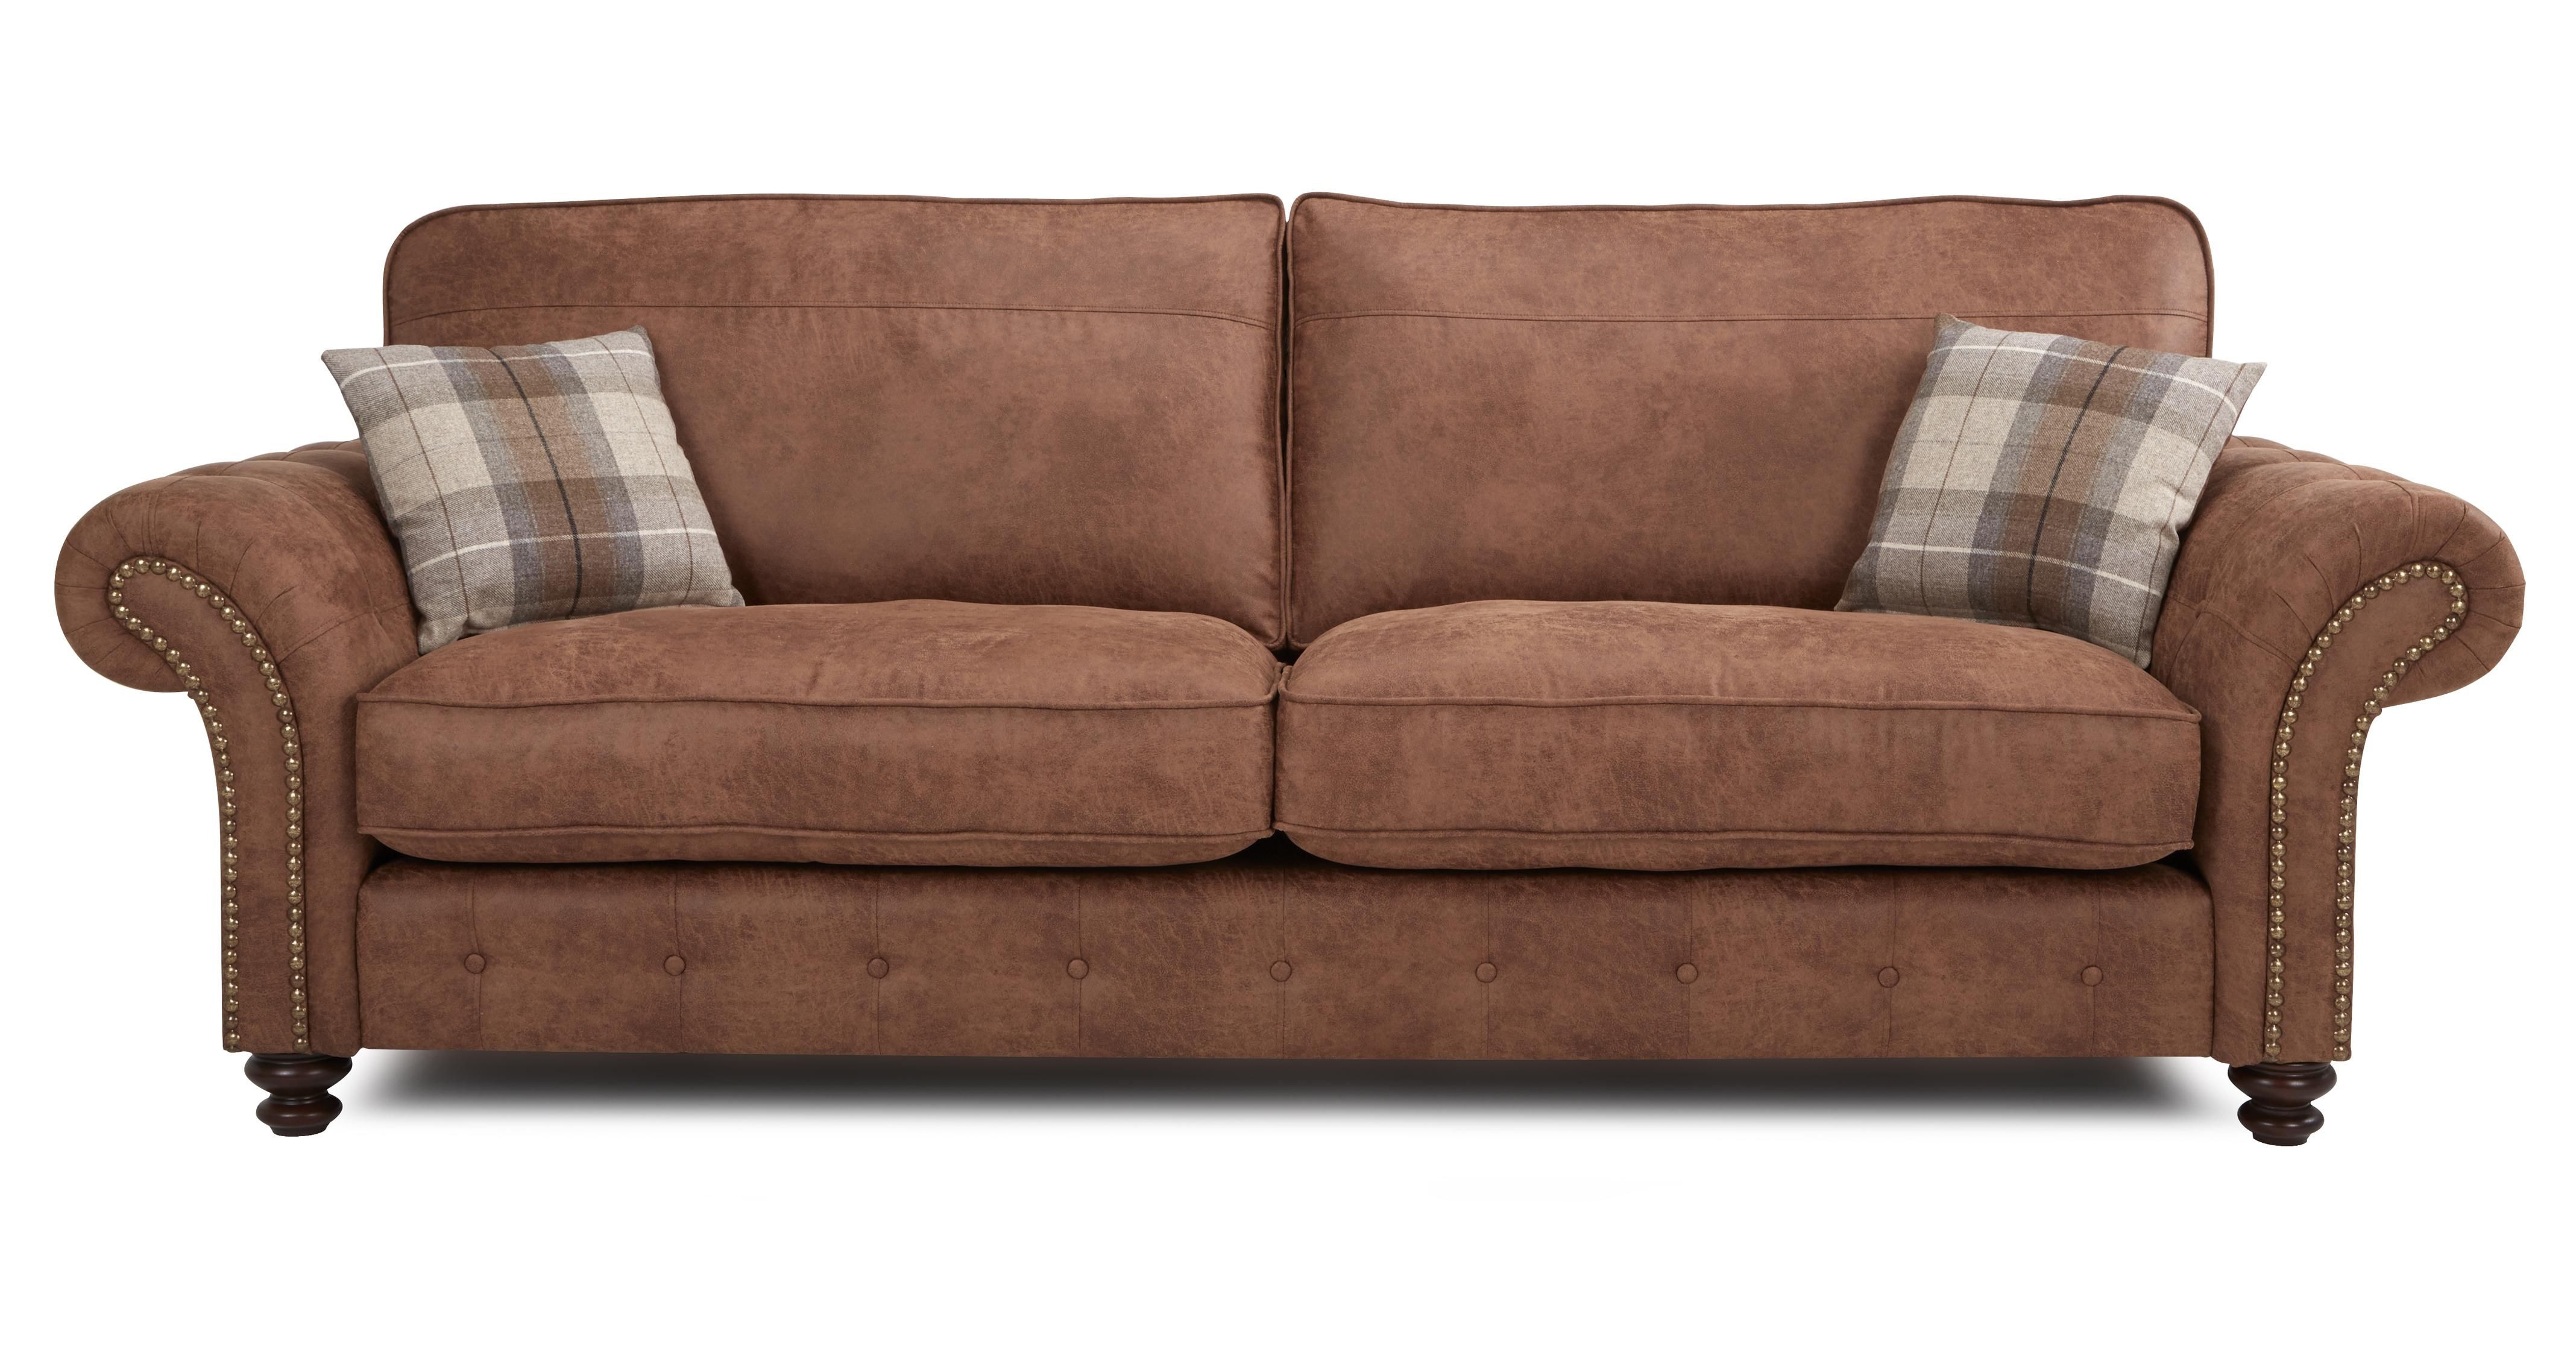 Dfs 4 Seater Leather Sofa 70 With Dfs 4 Seater Leather Sofa For 4 Seat Leather Sofas (View 10 of 15)